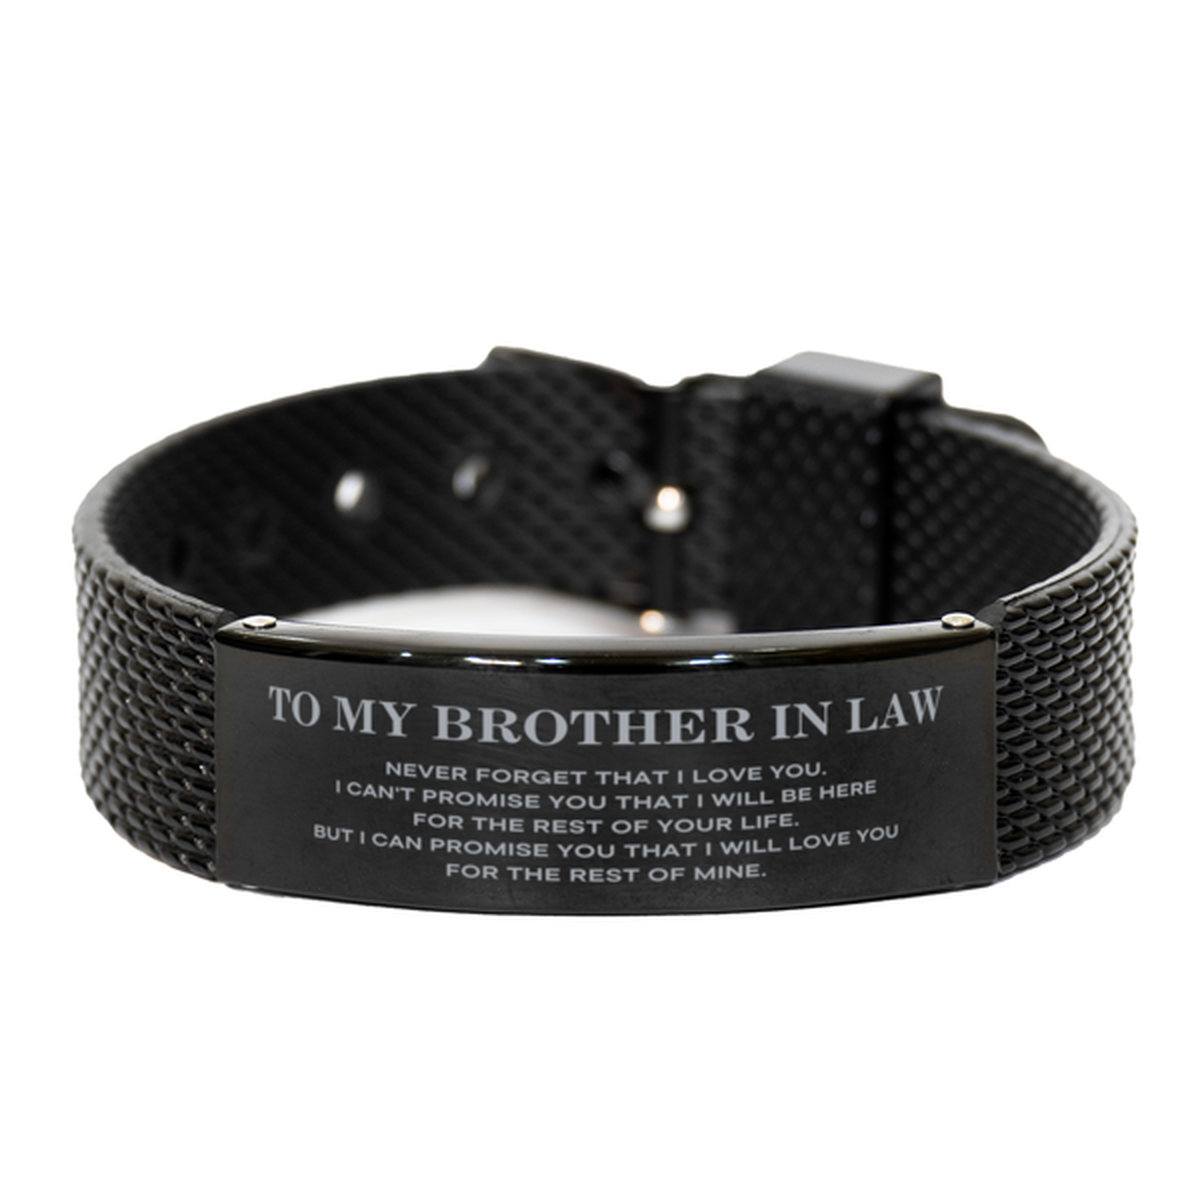 To My Brother In Law Gifts, I will love you for the rest of mine, Love Brother In Law Bracelet, Birthday Christmas Unique Black Shark Mesh Bracelet For Brother In Law